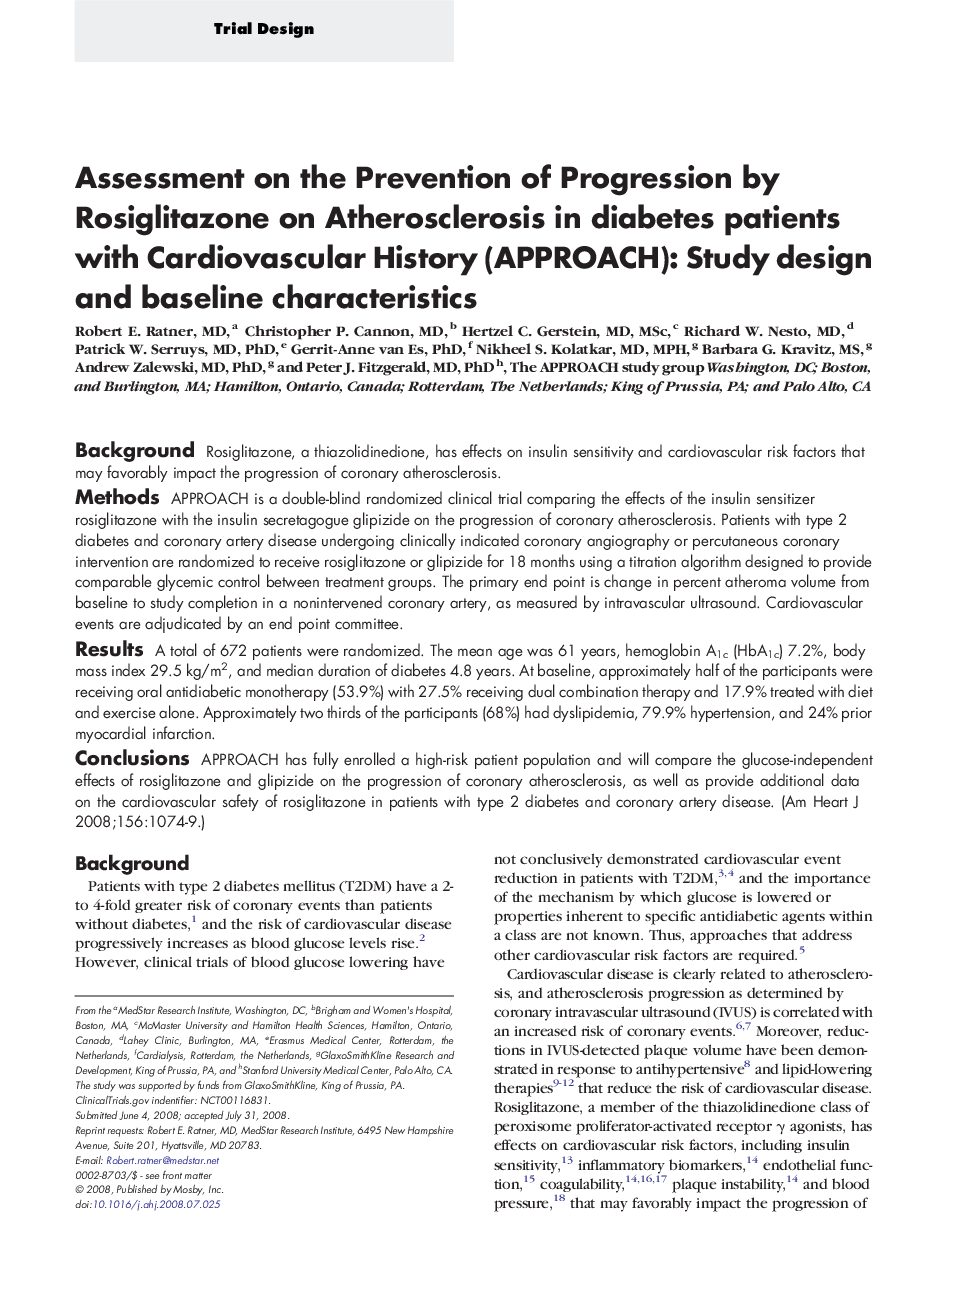 Assessment on the Prevention of Progression by Rosiglitazone on Atherosclerosis in diabetes patients with Cardiovascular History (APPROACH): Study design and baseline characteristics 